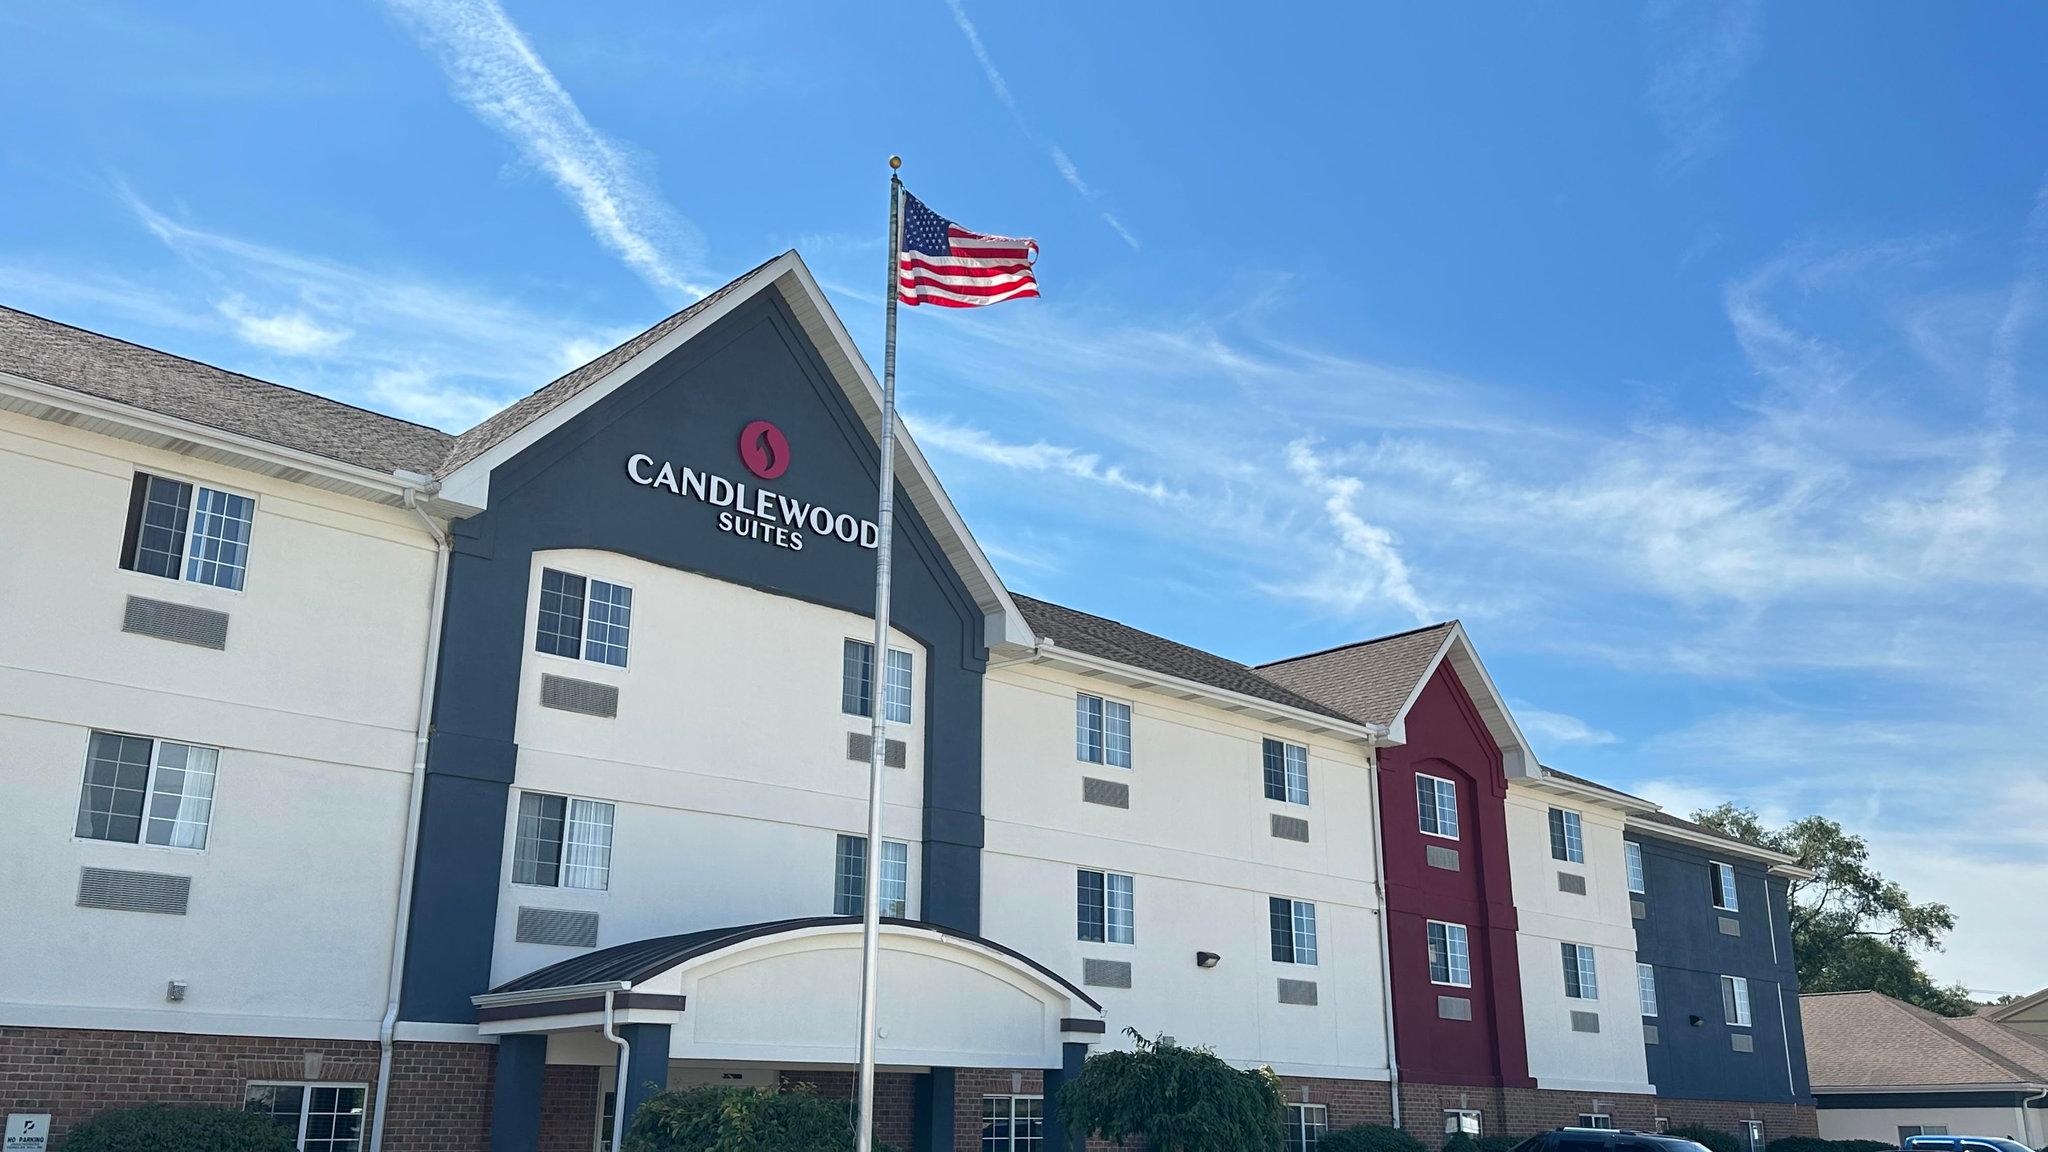 Candlewood Suites South Bend Airport in South Bend, IN